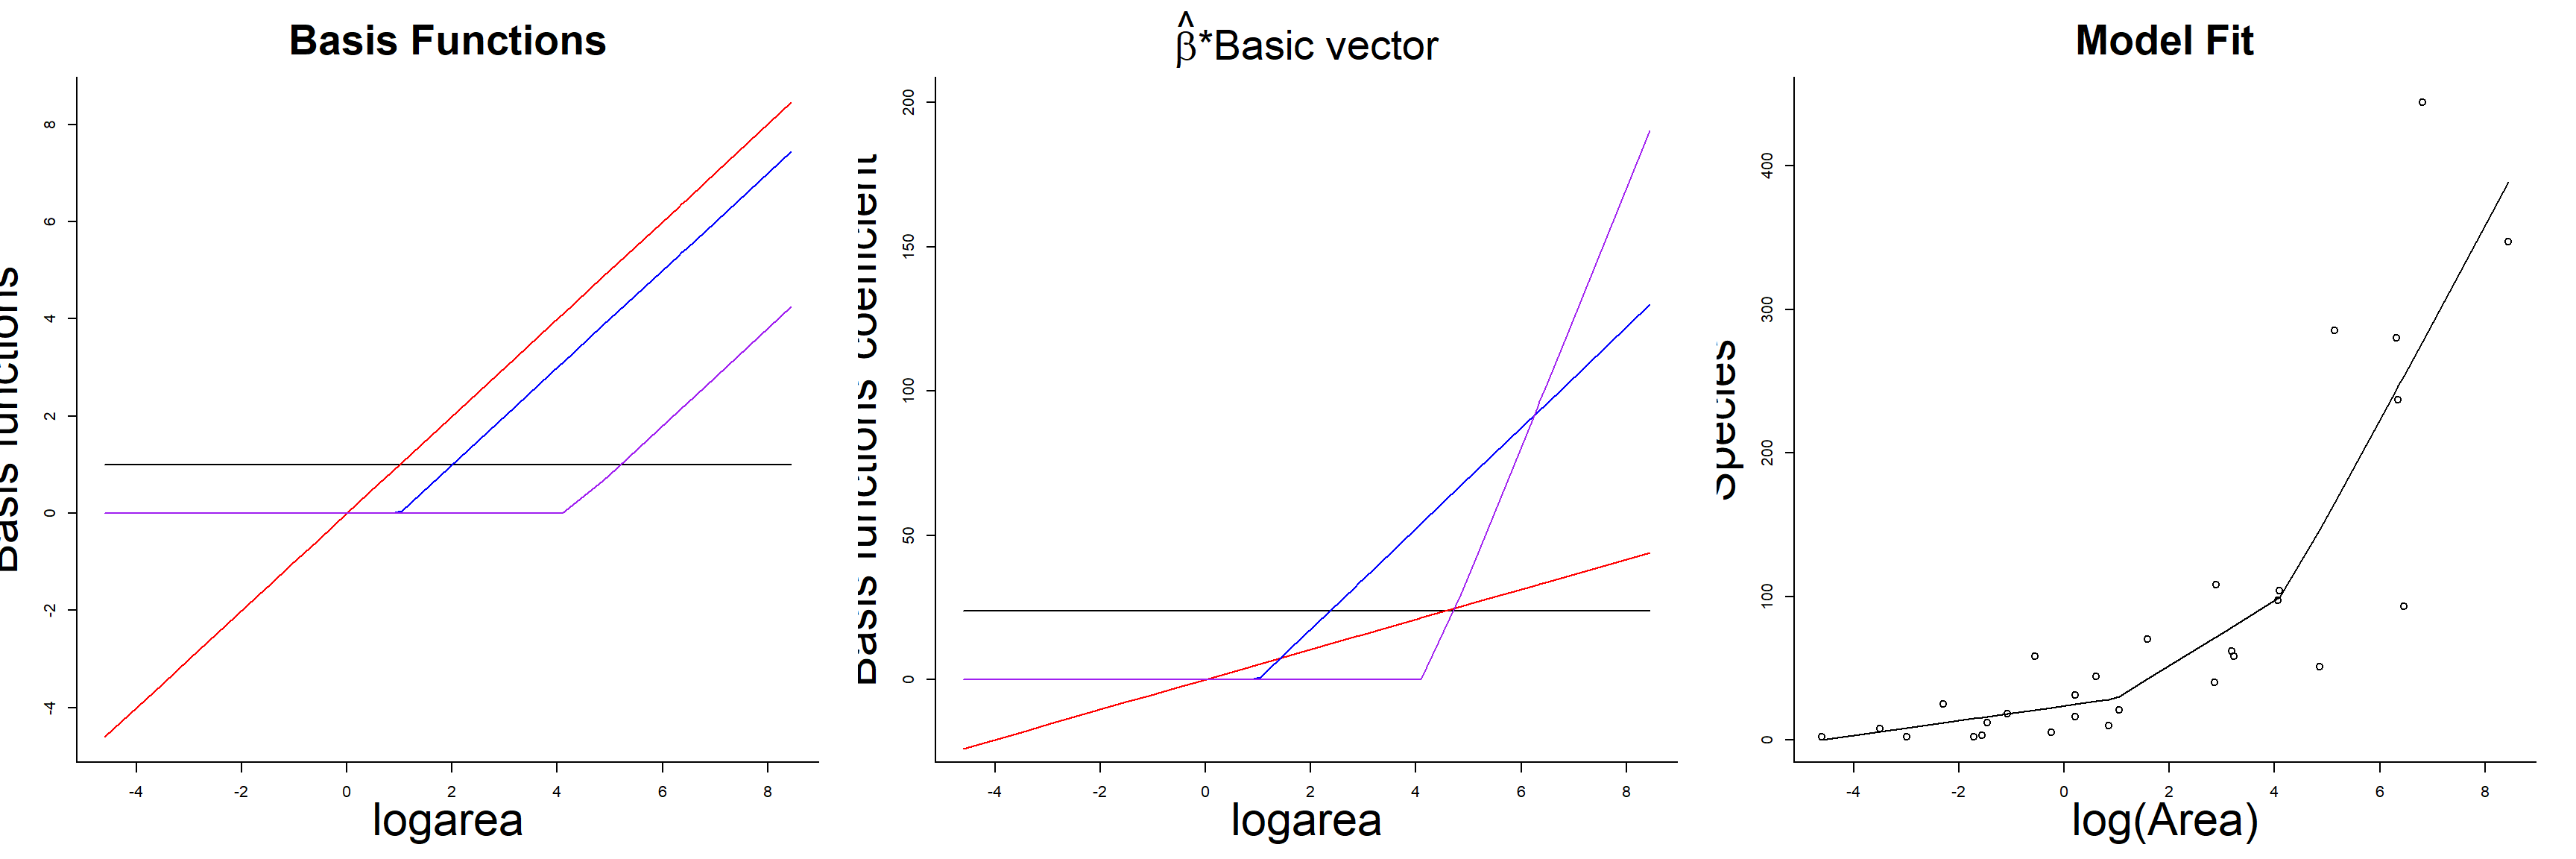 Basis vectors, weighted basis vectors, and predicted values formed by summing the weighted basis vectors in the linear spline model relating plant species richness to log(Area) for 29 islands in the Galapagos Islands archipelago. Data are from M. P. Johnson & Raven (1973).